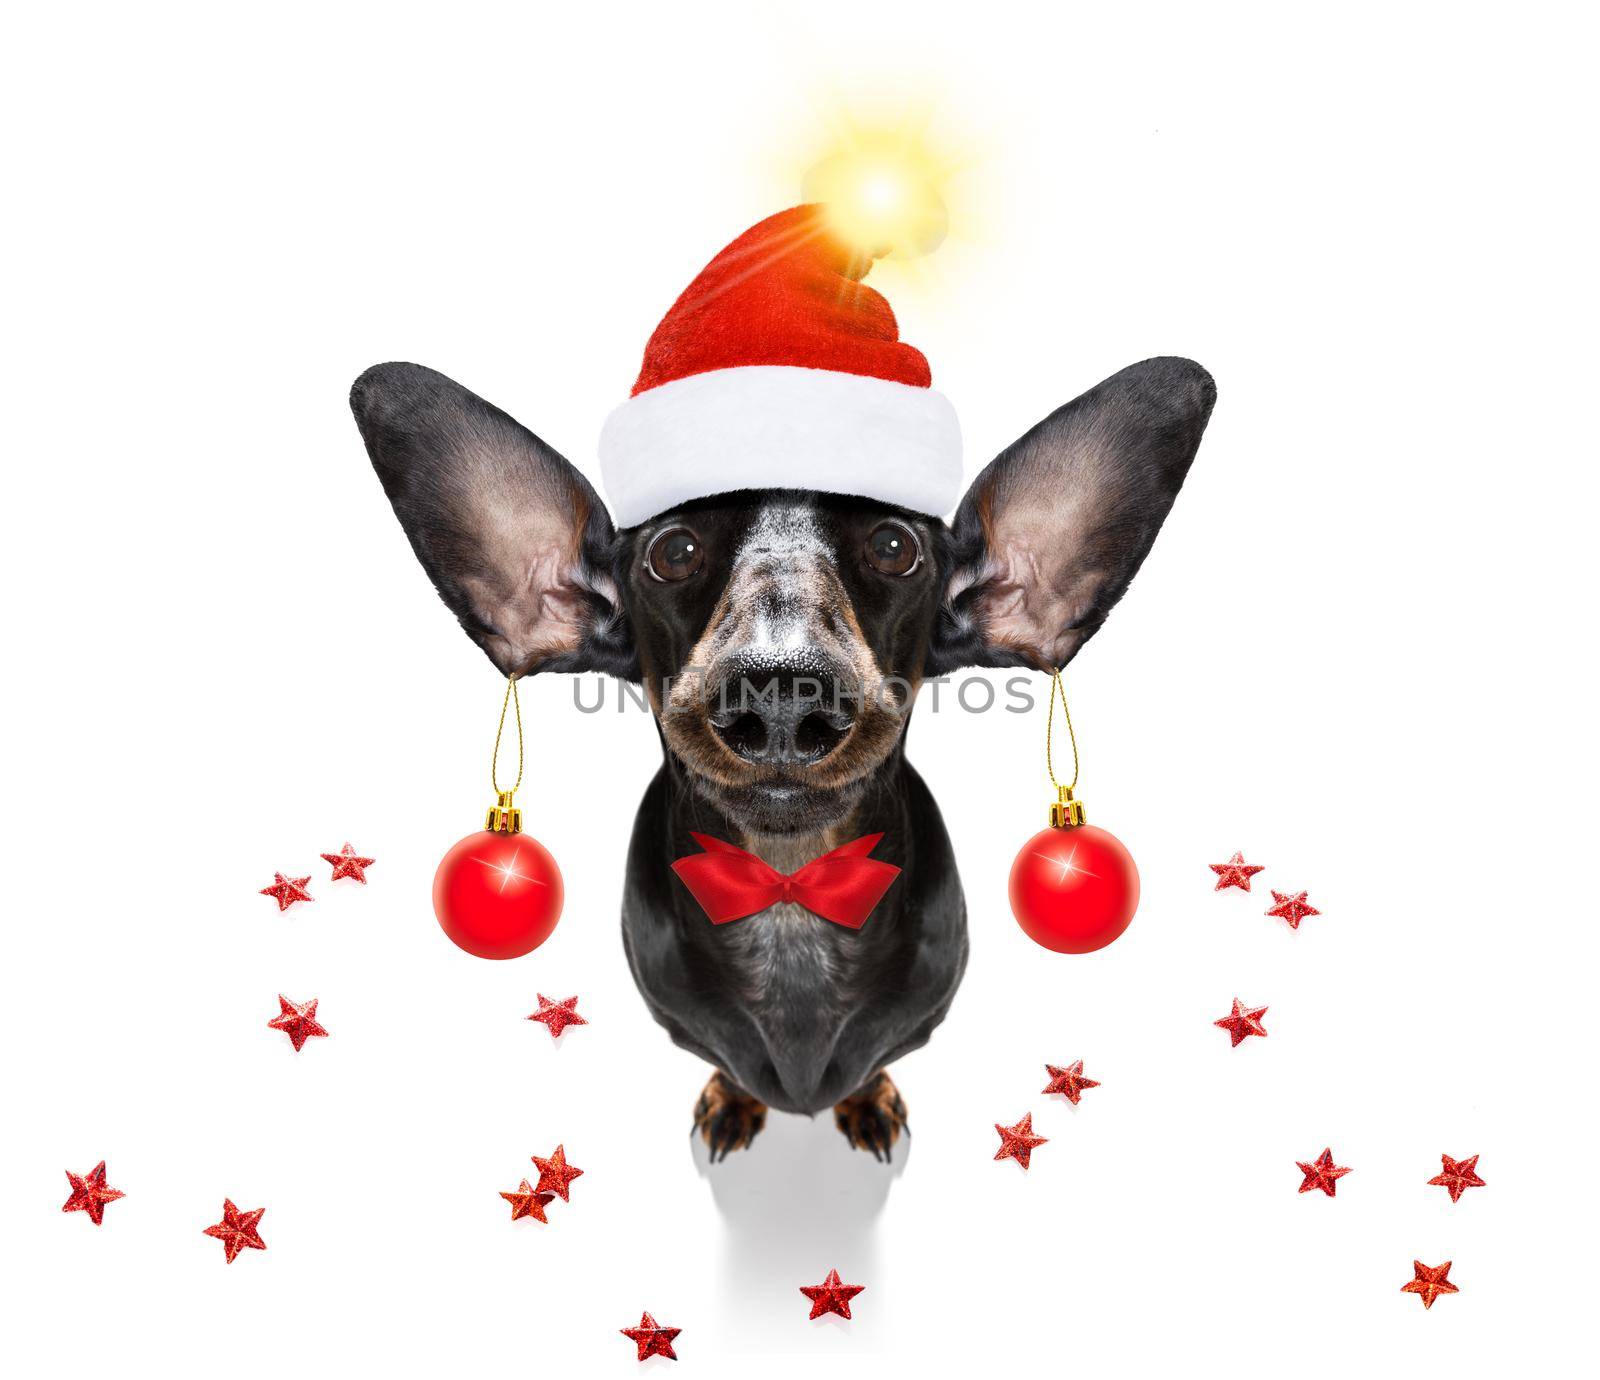 dachsund sausage dog  as santa claus  for christmas holidays resting on a xmas balls baubles hanging from ears